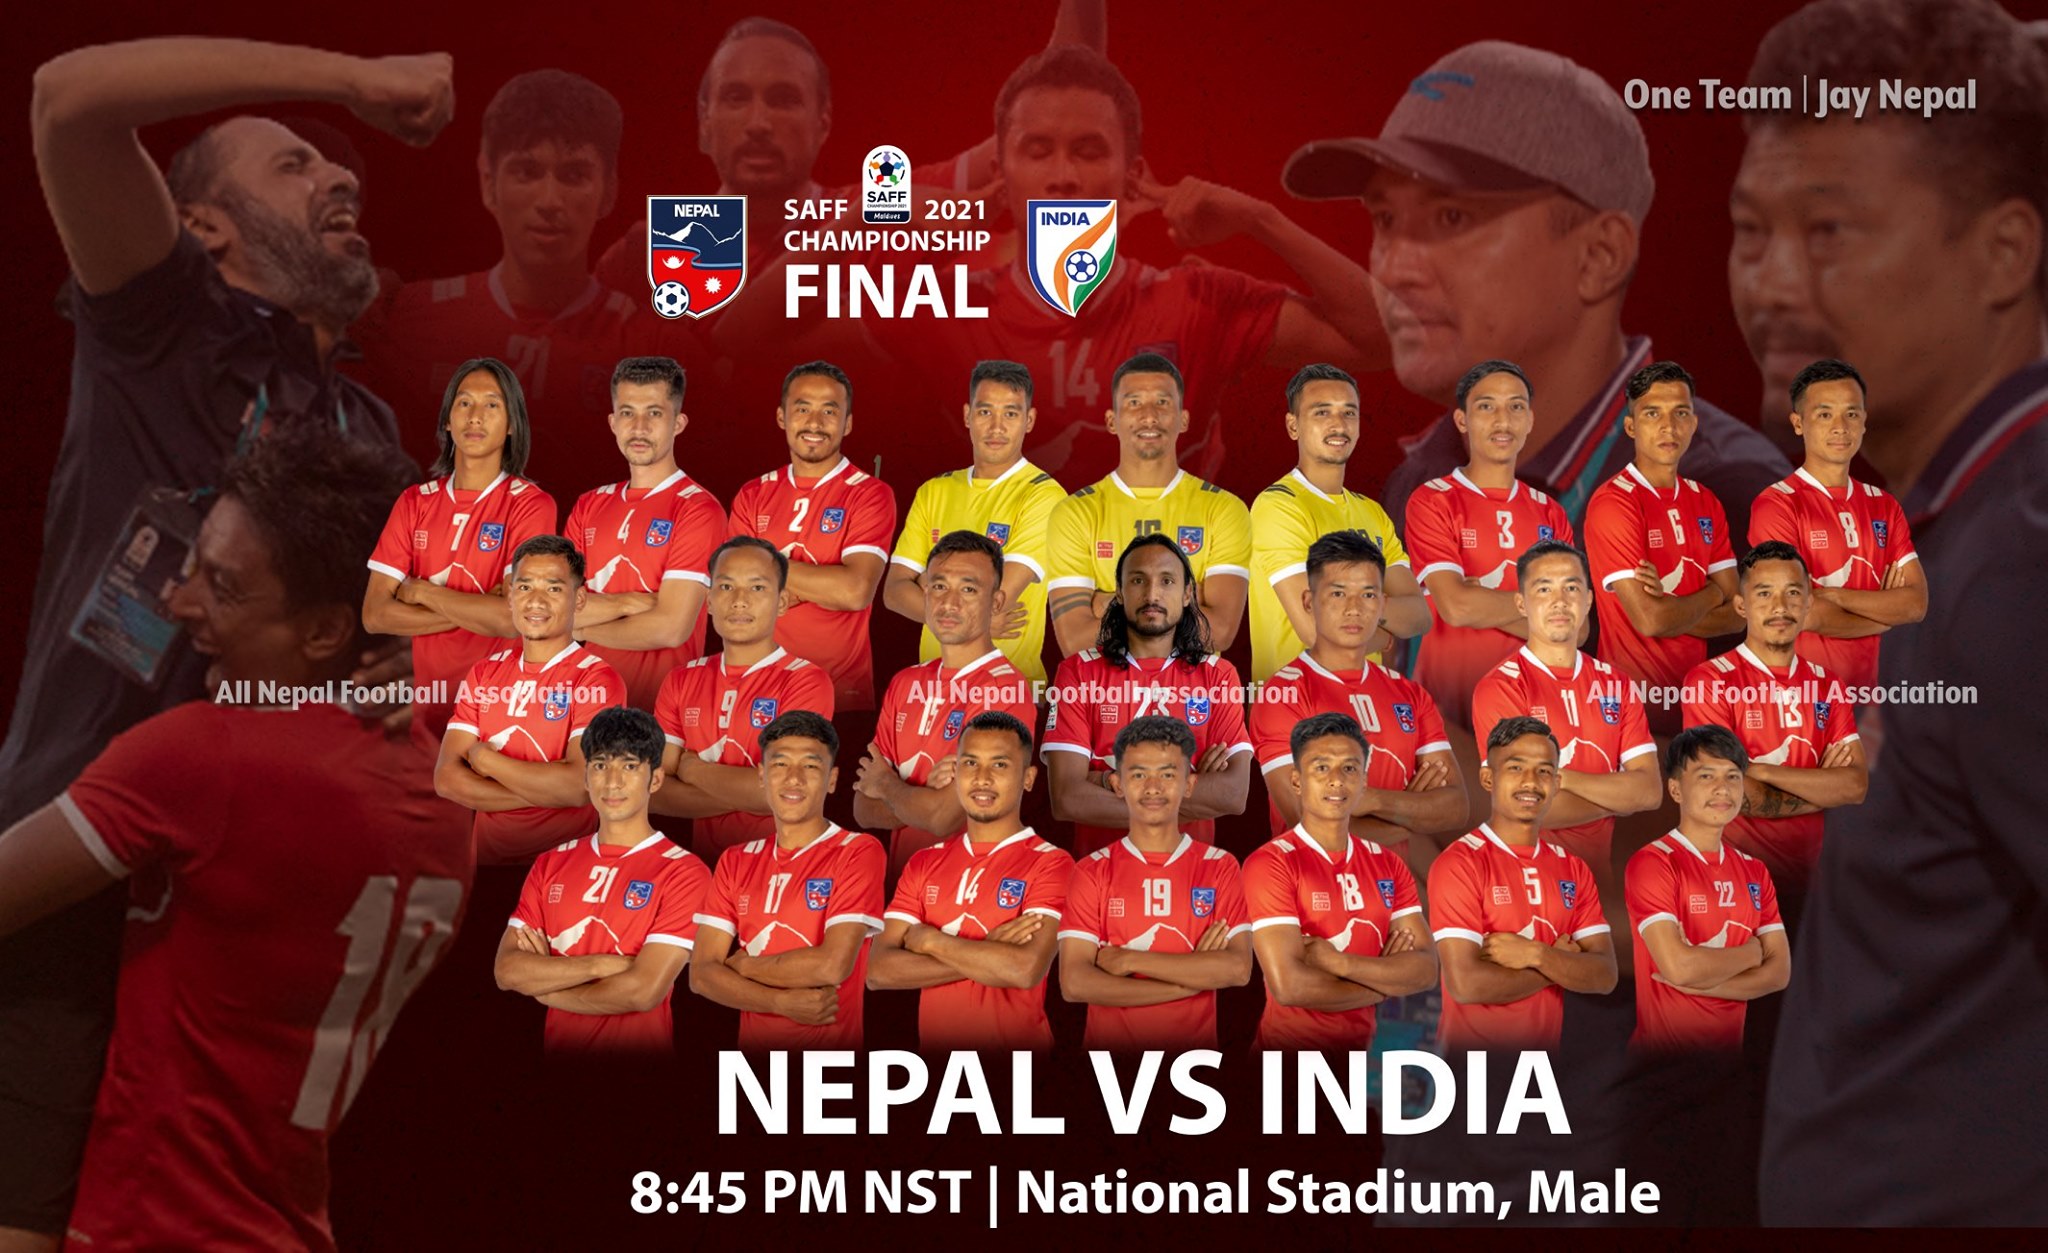 Another opportunity for Nepal, won only 2 out of 22 games